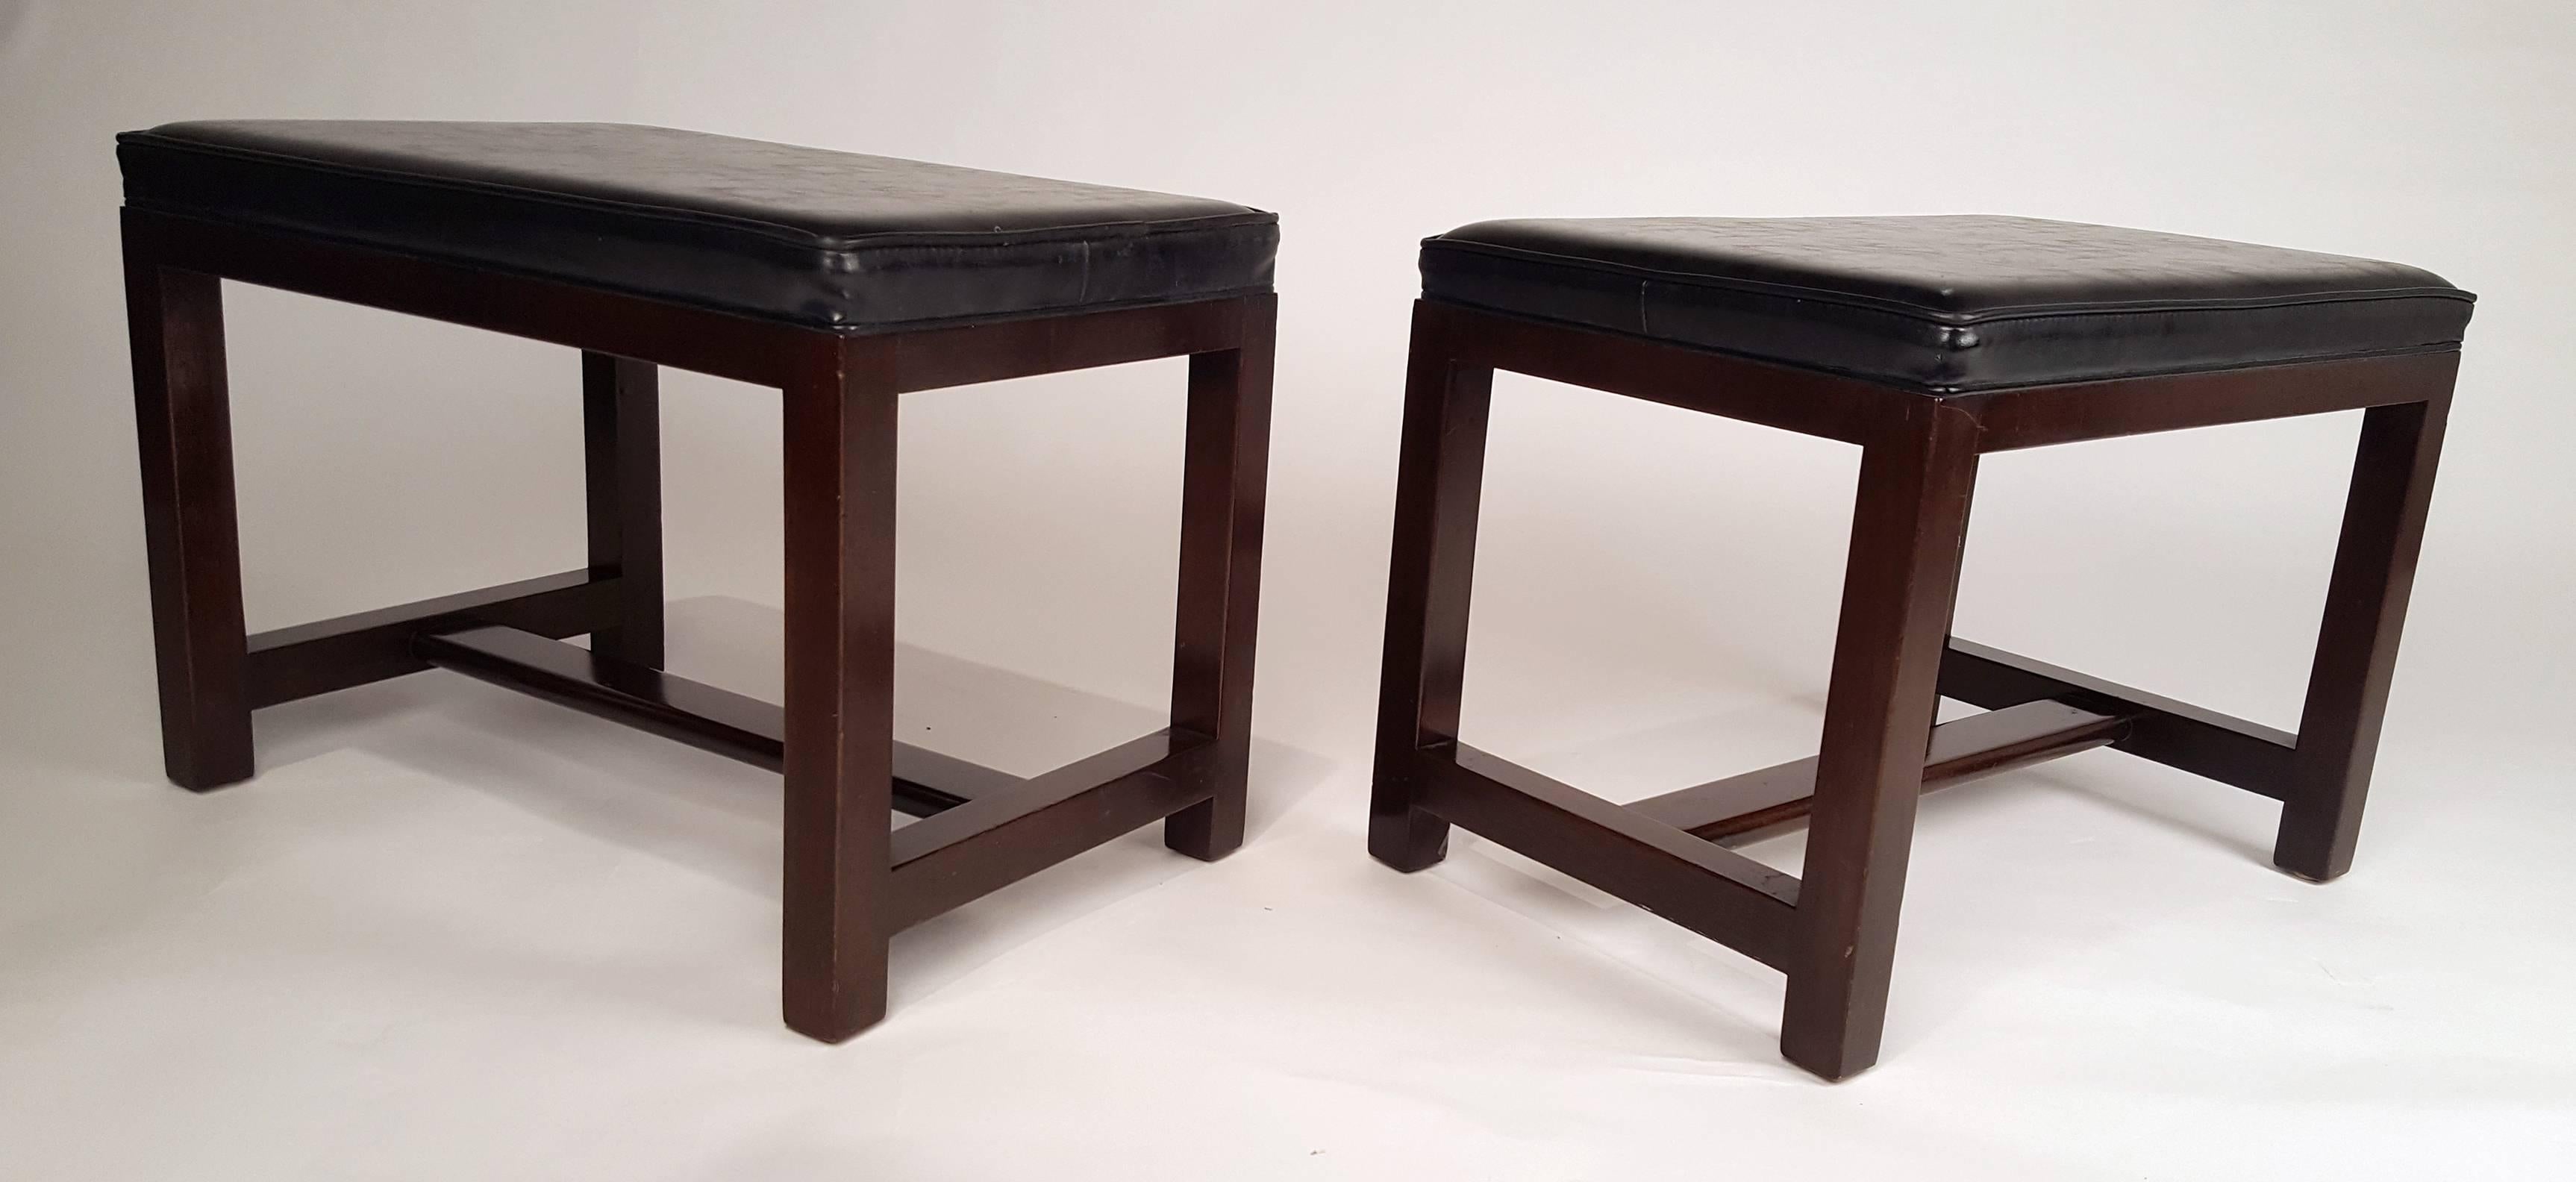 Mid-20th Century Two Pairs of Solid Mahogany Stools by Edward Wormley for Dunbar For Sale